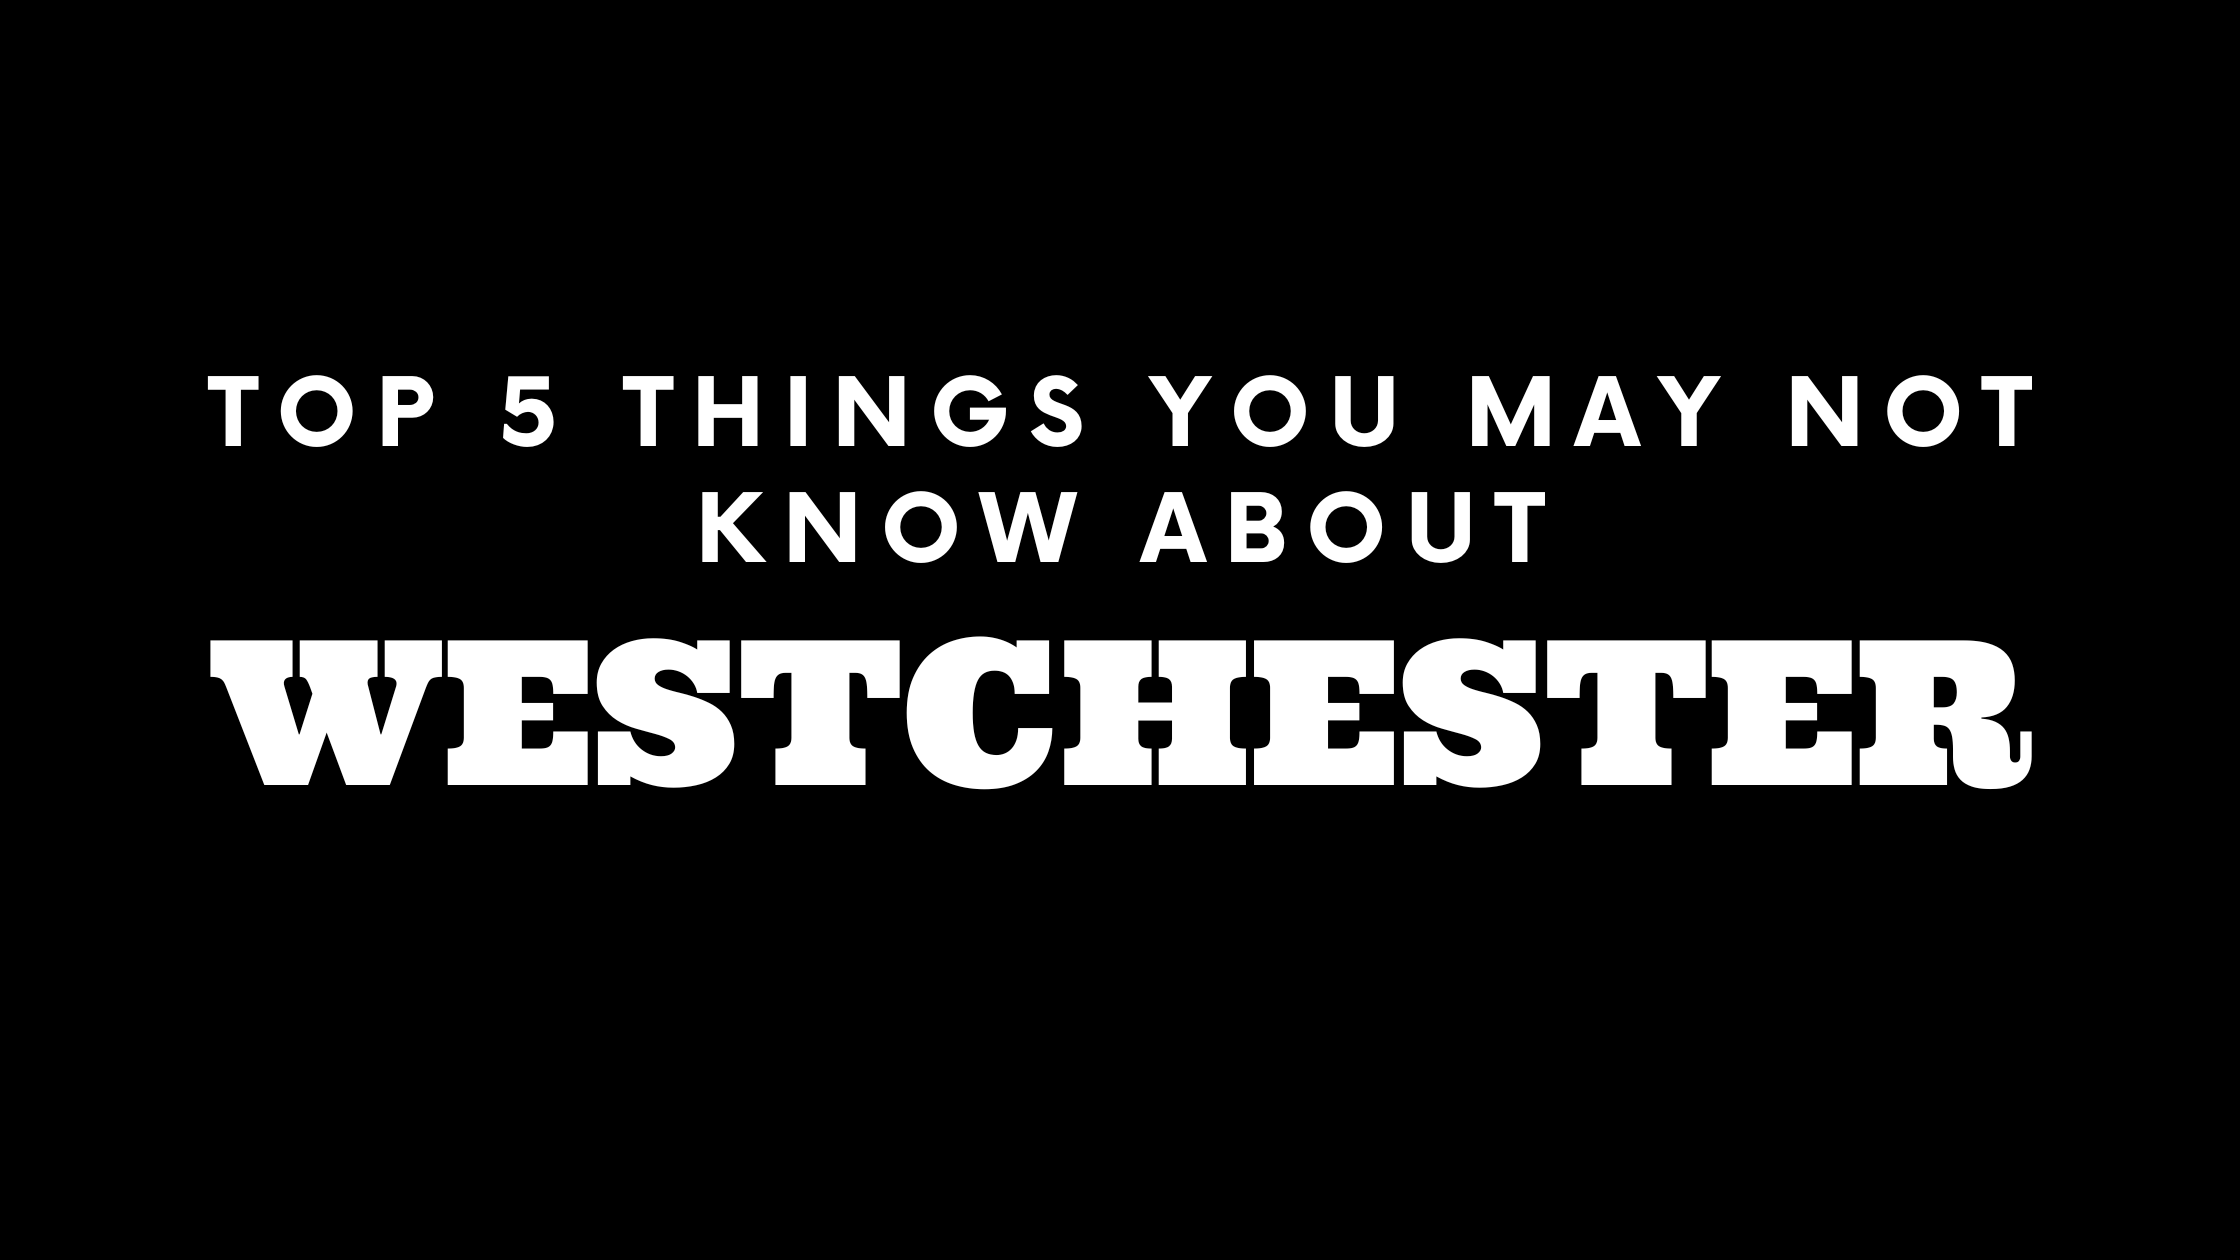 Top 5 Things You May Not Know About Westchester